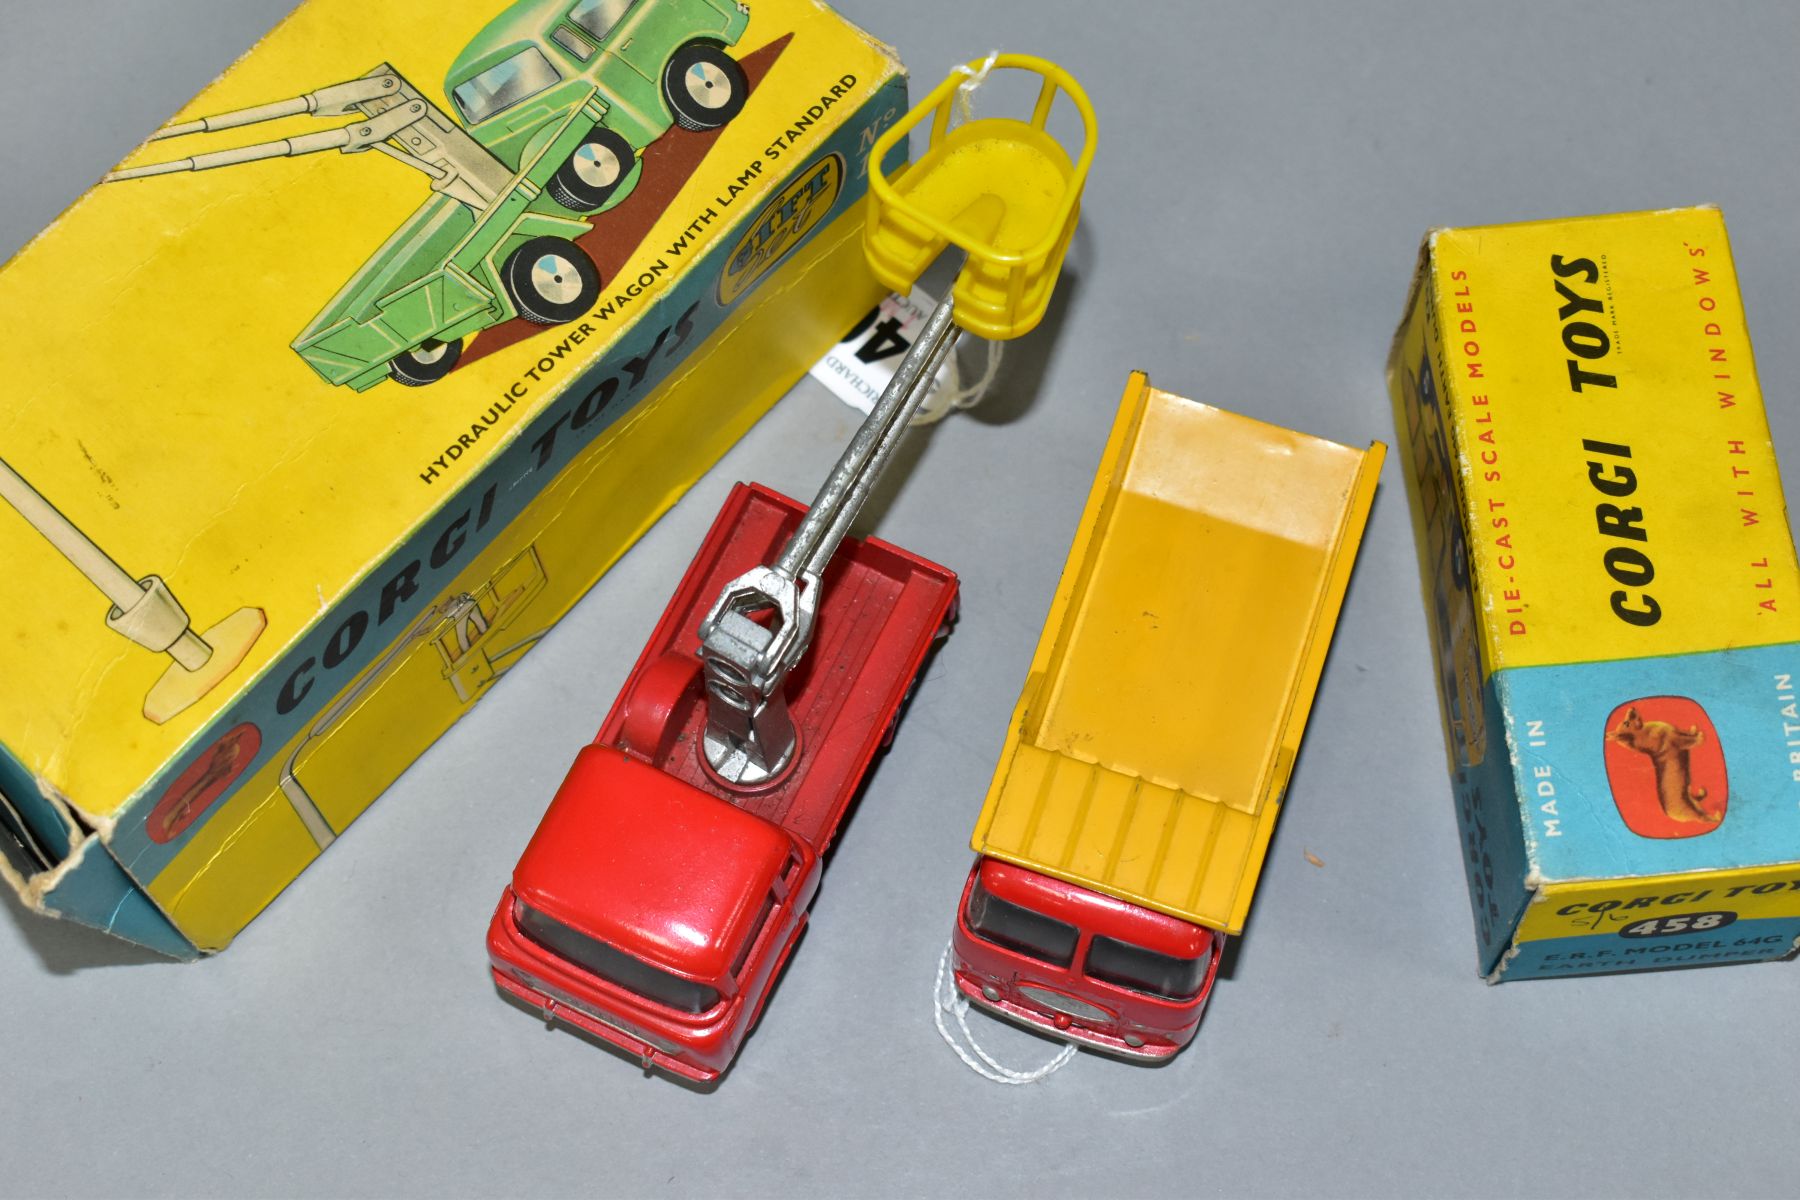 A BOXED CORGI TOYS GIFT SET, No 14, contains FC Jeep Tower Wagon, No 409 but is missing lamp - Image 11 of 11